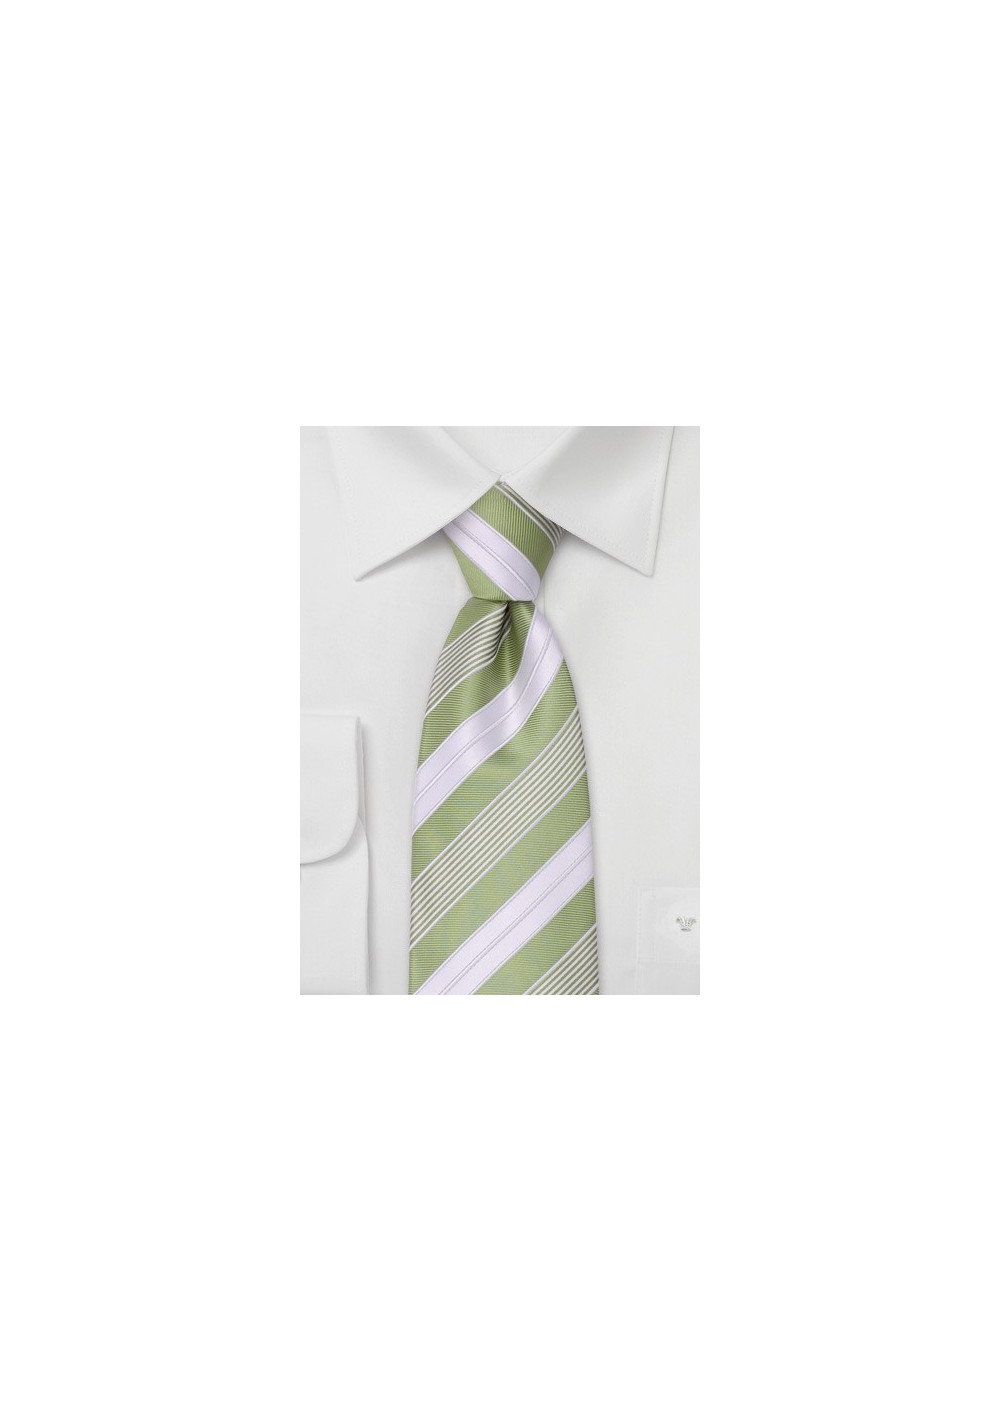 Striped Kids Tie in Lime-Green and White